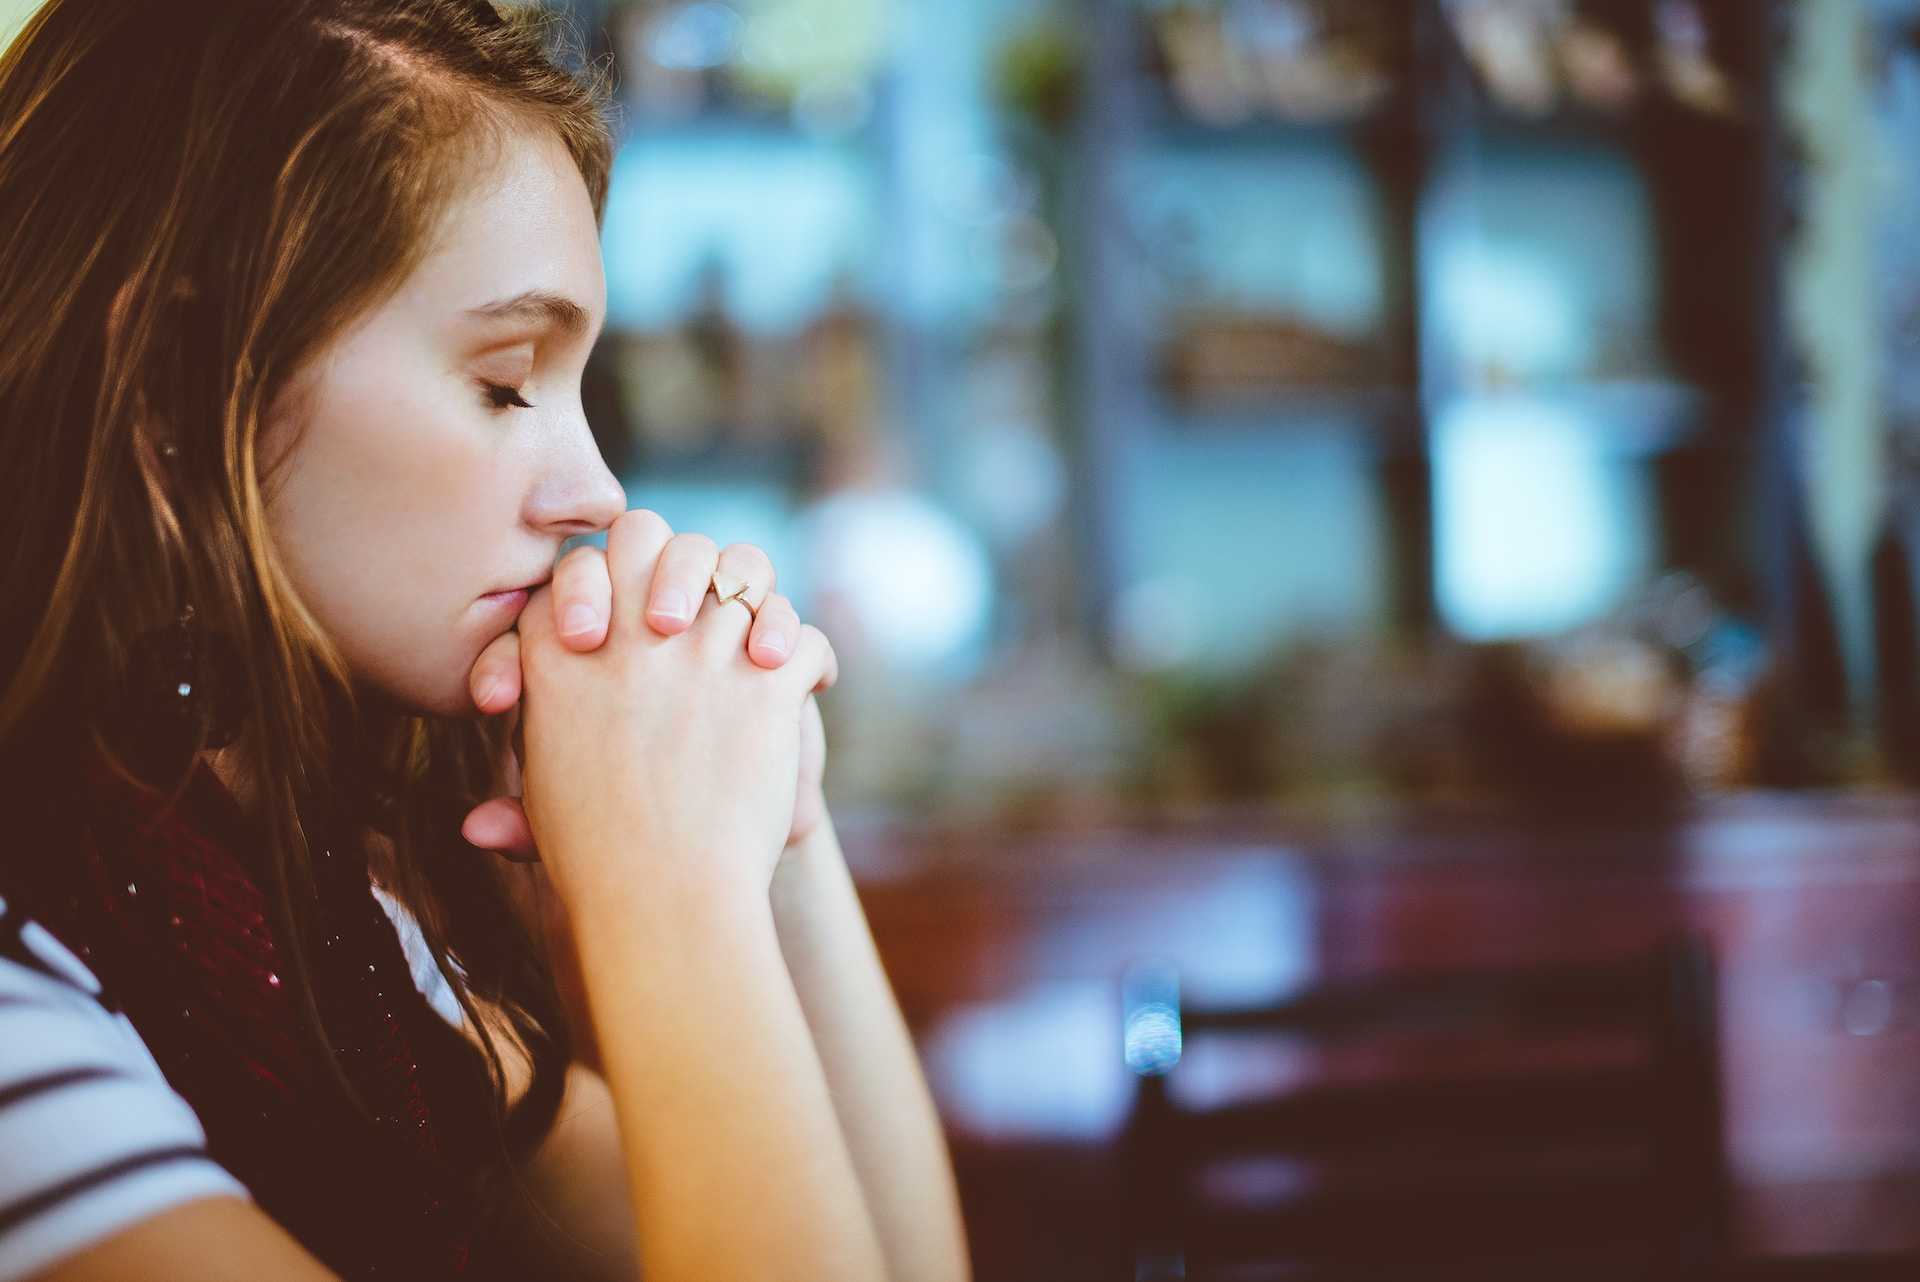 woman starting her day praying and receiving good morning wife messages